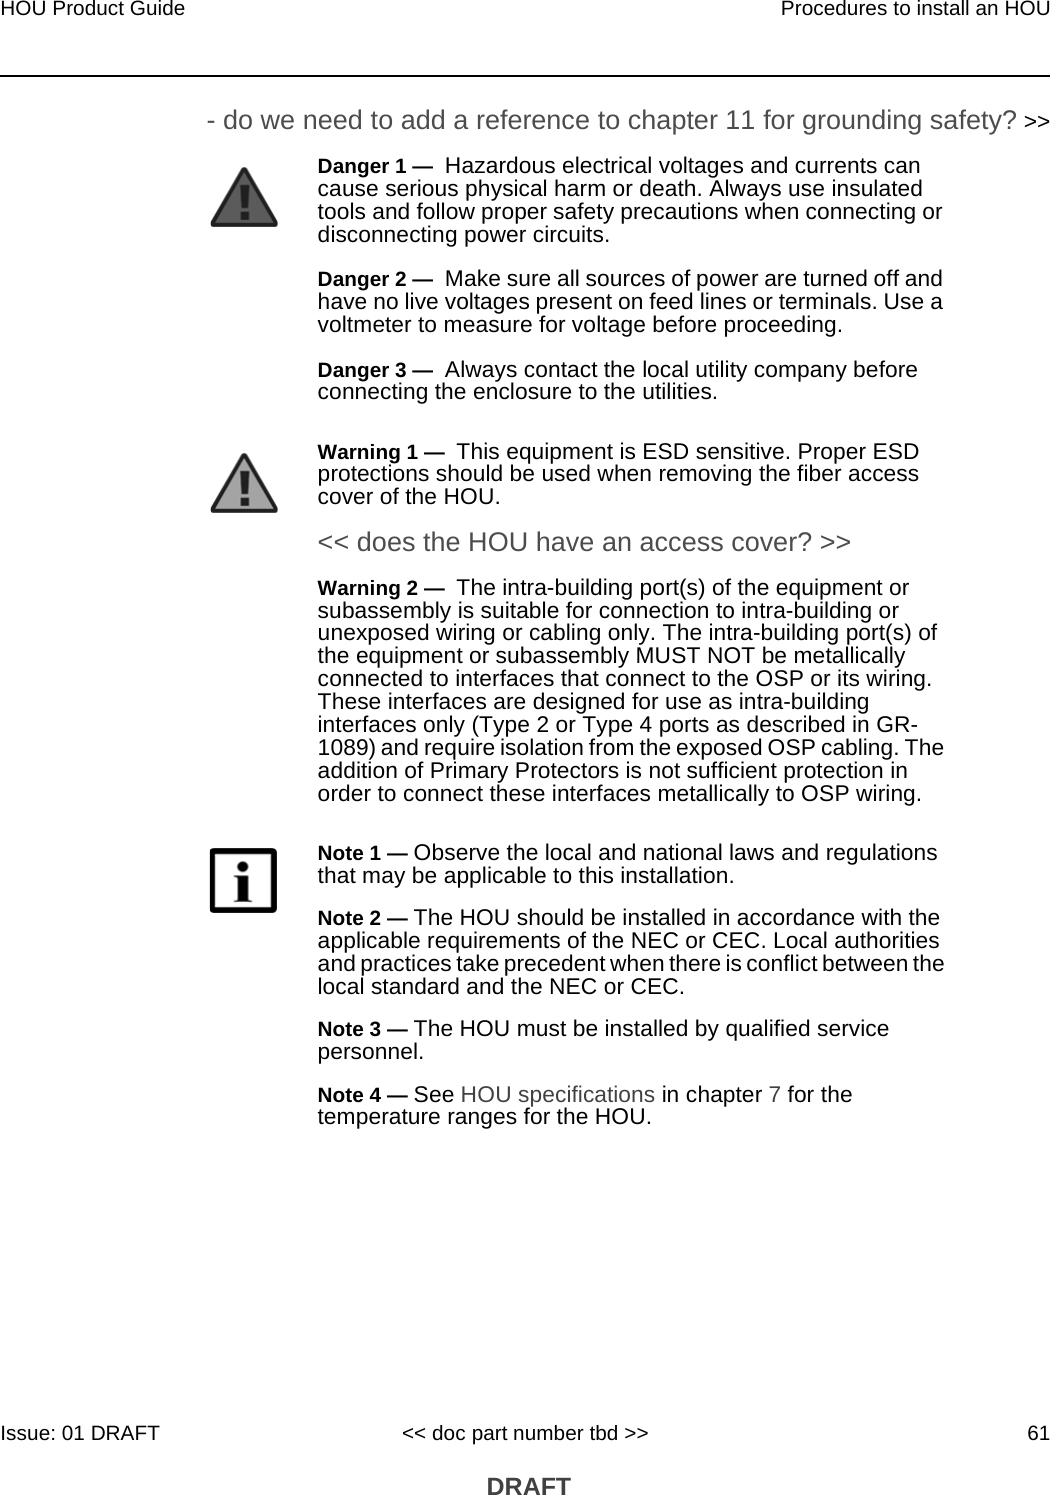 HOU Product Guide Procedures to install an HOUIssue: 01 DRAFT &lt;&lt; doc part number tbd &gt;&gt; 61 DRAFT- do we need to add a reference to chapter 11 for grounding safety? &gt;&gt;Danger 1 —  Hazardous electrical voltages and currents can cause serious physical harm or death. Always use insulated tools and follow proper safety precautions when connecting or disconnecting power circuits. Danger 2 —  Make sure all sources of power are turned off and have no live voltages present on feed lines or terminals. Use a voltmeter to measure for voltage before proceeding.Danger 3 —  Always contact the local utility company before connecting the enclosure to the utilities.Warning 1 —  This equipment is ESD sensitive. Proper ESD protections should be used when removing the fiber access cover of the HOU.&lt;&lt; does the HOU have an access cover? &gt;&gt;Warning 2 —  The intra-building port(s) of the equipment or subassembly is suitable for connection to intra-building or unexposed wiring or cabling only. The intra-building port(s) of the equipment or subassembly MUST NOT be metallically connected to interfaces that connect to the OSP or its wiring. These interfaces are designed for use as intra-building interfaces only (Type 2 or Type 4 ports as described in GR- 1089) and require isolation from the exposed OSP cabling. The addition of Primary Protectors is not sufficient protection in order to connect these interfaces metallically to OSP wiring.Note 1 — Observe the local and national laws and regulations that may be applicable to this installation.Note 2 — The HOU should be installed in accordance with the applicable requirements of the NEC or CEC. Local authorities and practices take precedent when there is conflict between the local standard and the NEC or CEC. Note 3 — The HOU must be installed by qualified service personnel.Note 4 — See HOU specifications in chapter 7 for the temperature ranges for the HOU. 